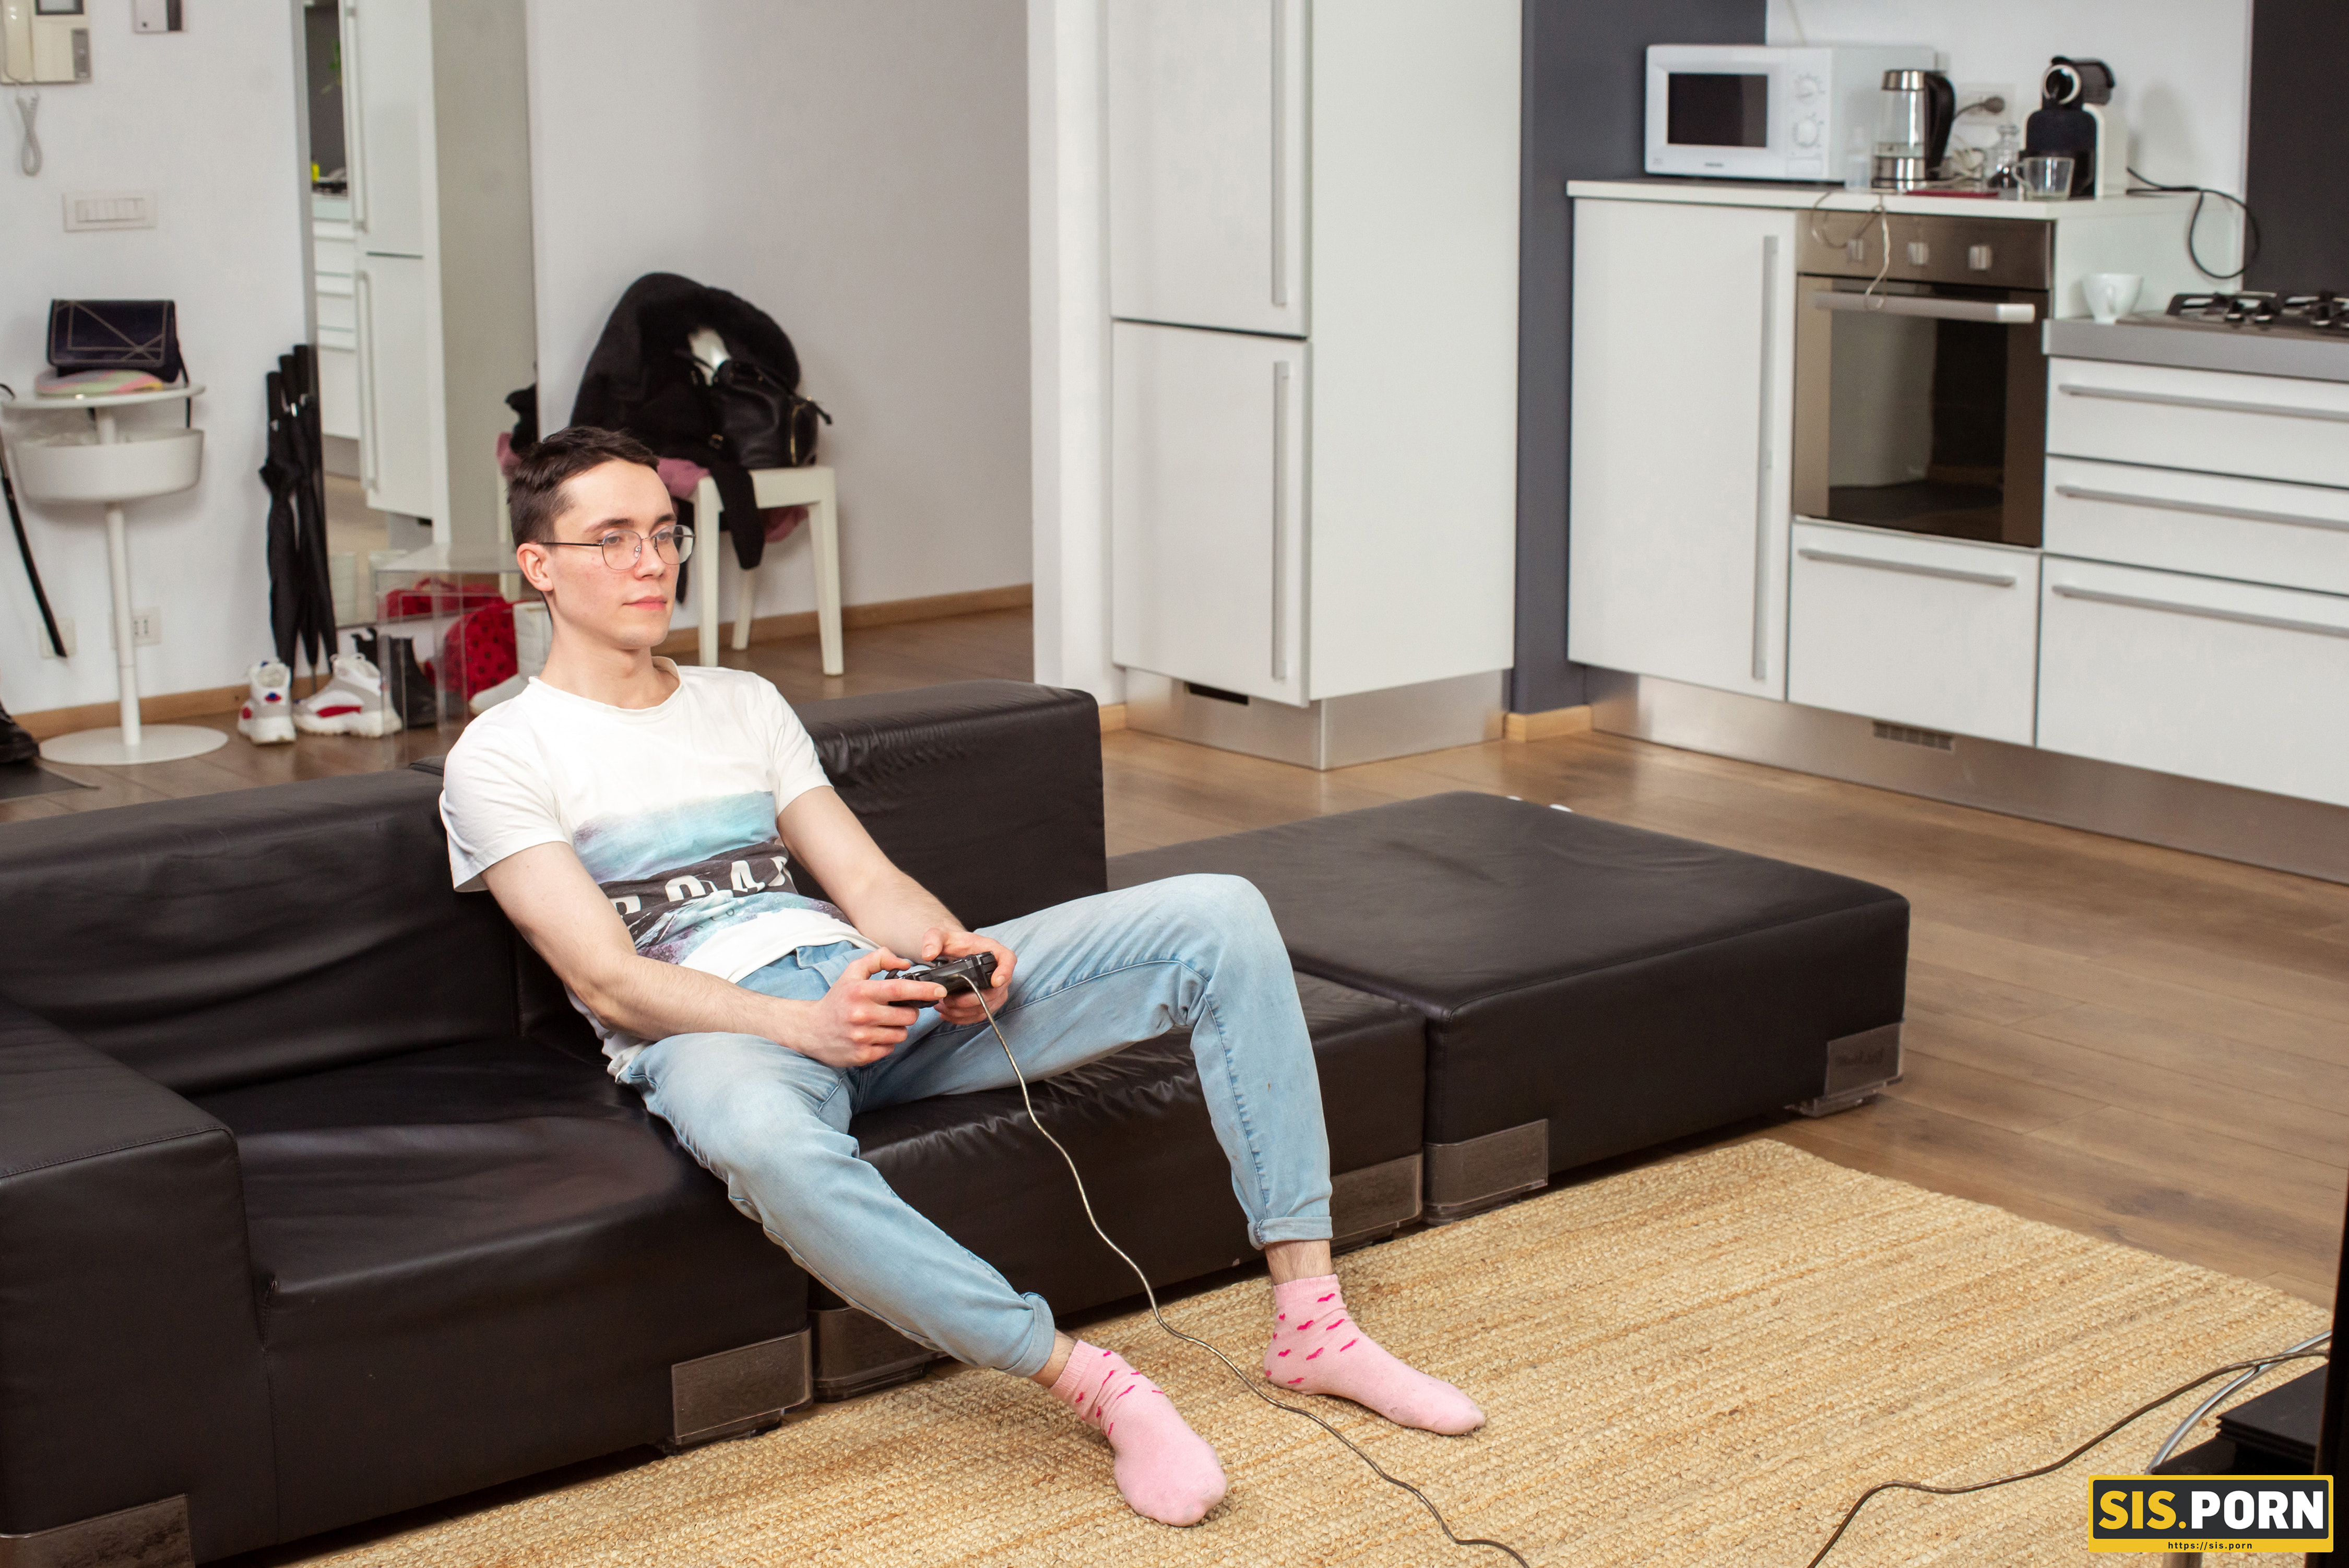 Anna Krowe - Playing video games or fucking my stepsister Didn't have to choose! | Picture (1)